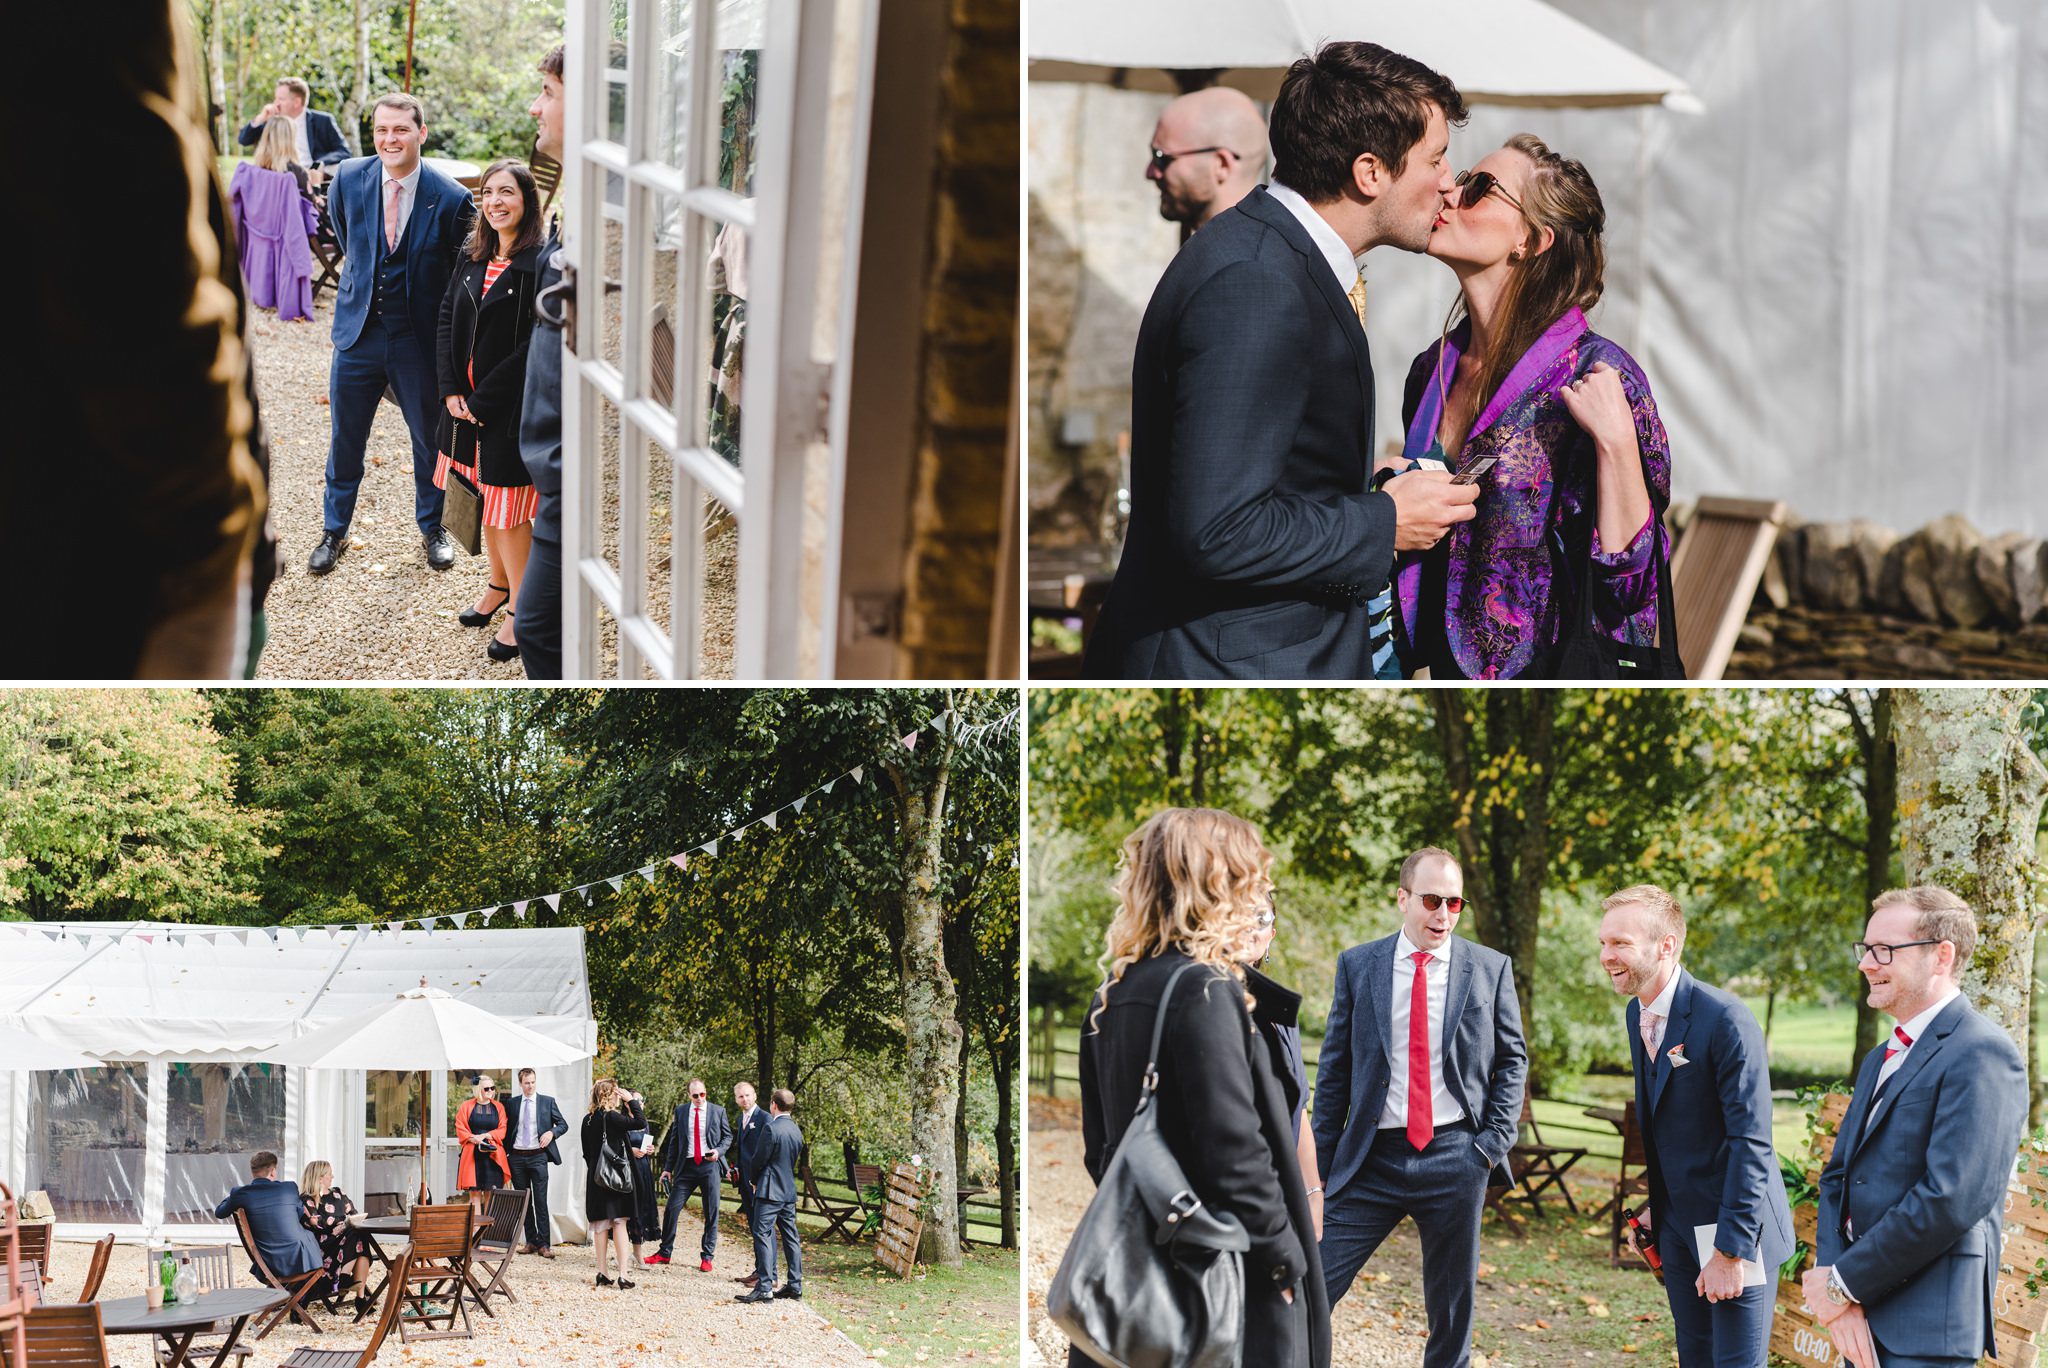 Wedding guests arriving at Owlpen Manor